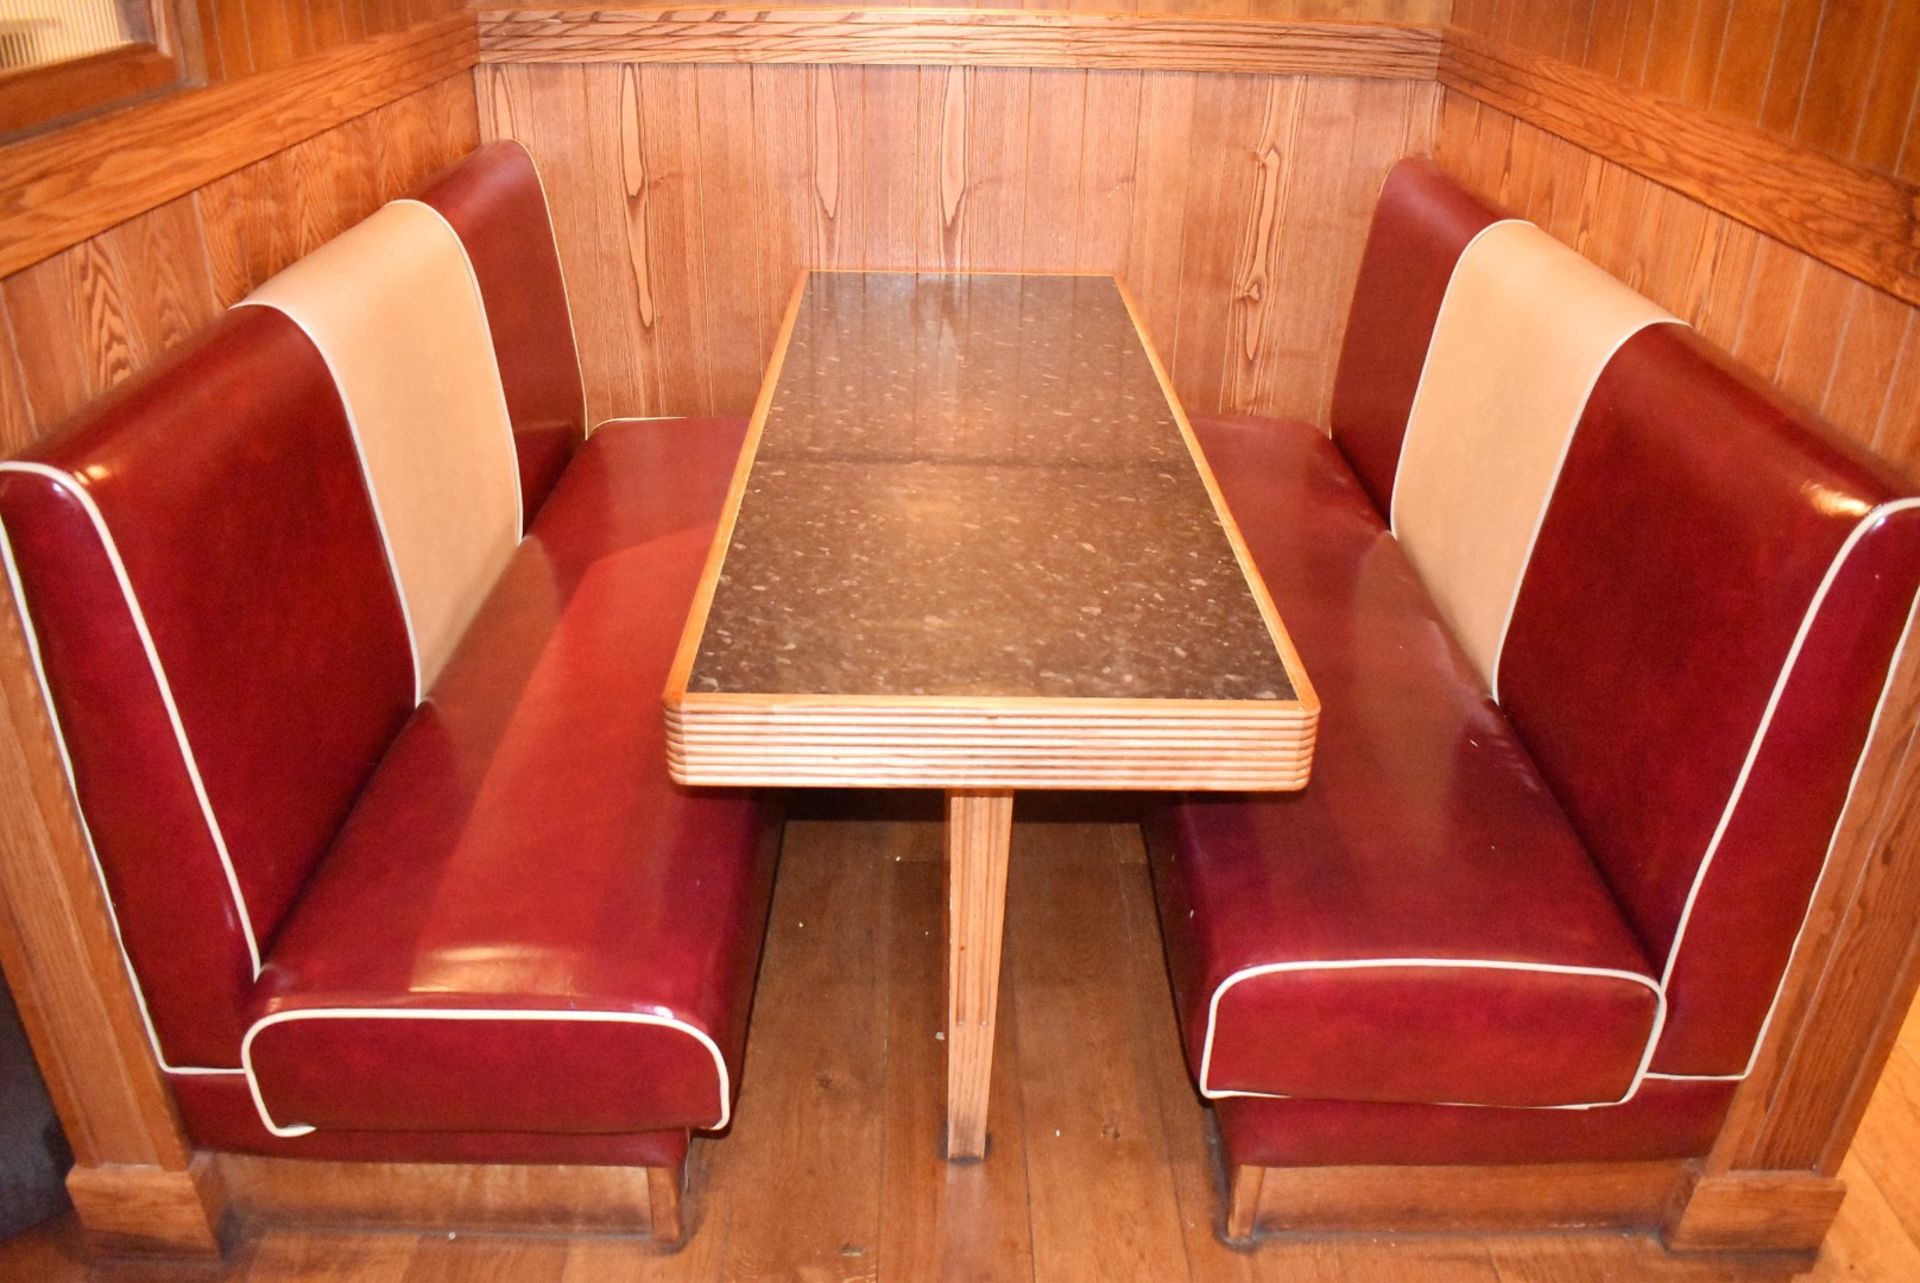 A Pair Of 3-Seater Single-sided Seating Benches to Seat Upto 6-Persons - Retro 1950's American Diner